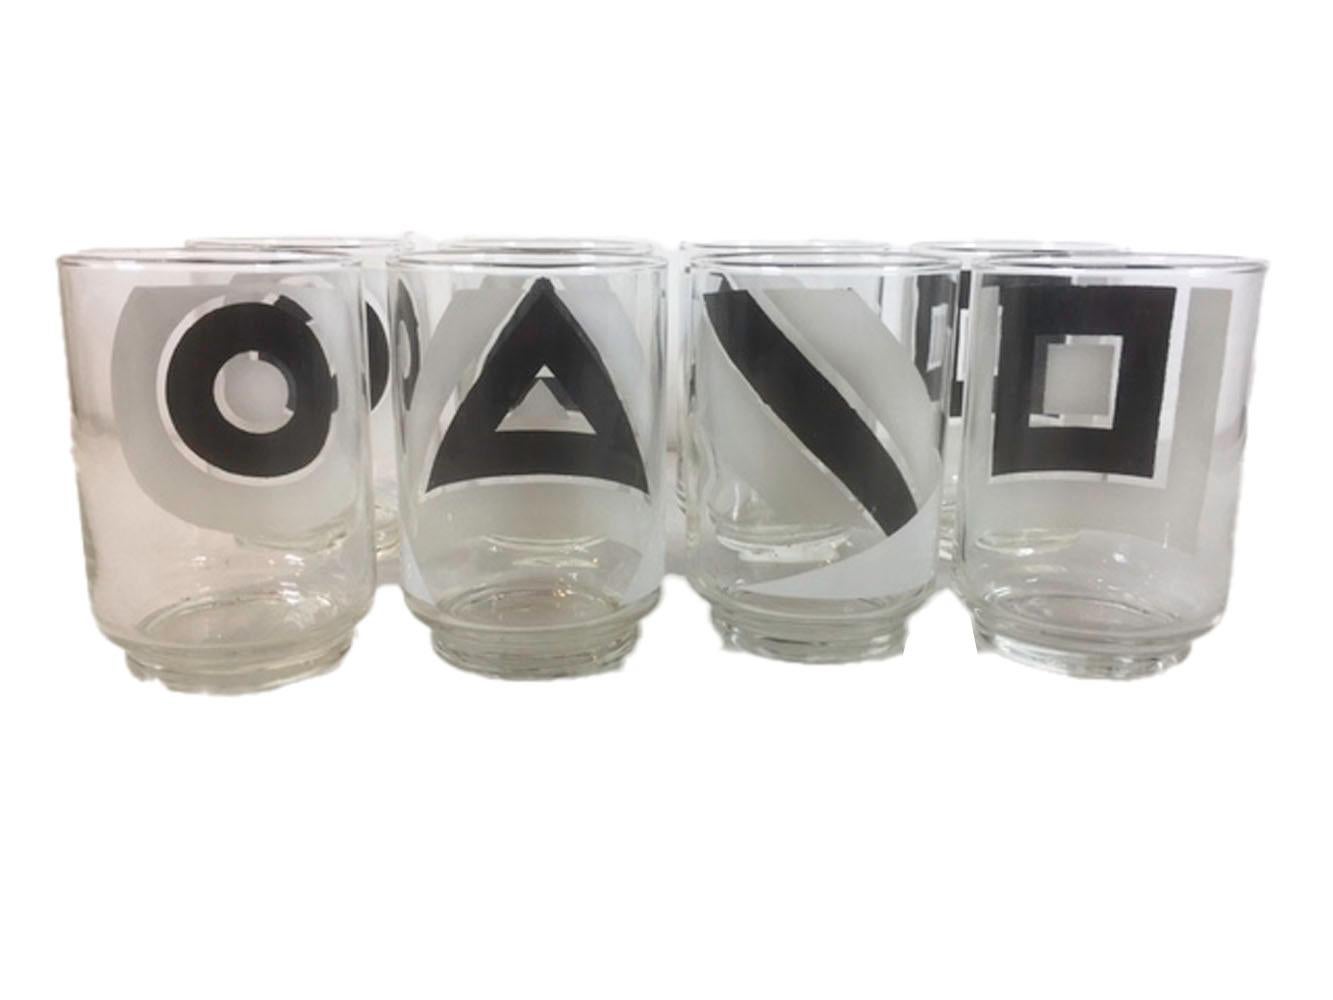 American Vintage Libbey Glass, Black and White Geometric Shapes Cocktail Glasses